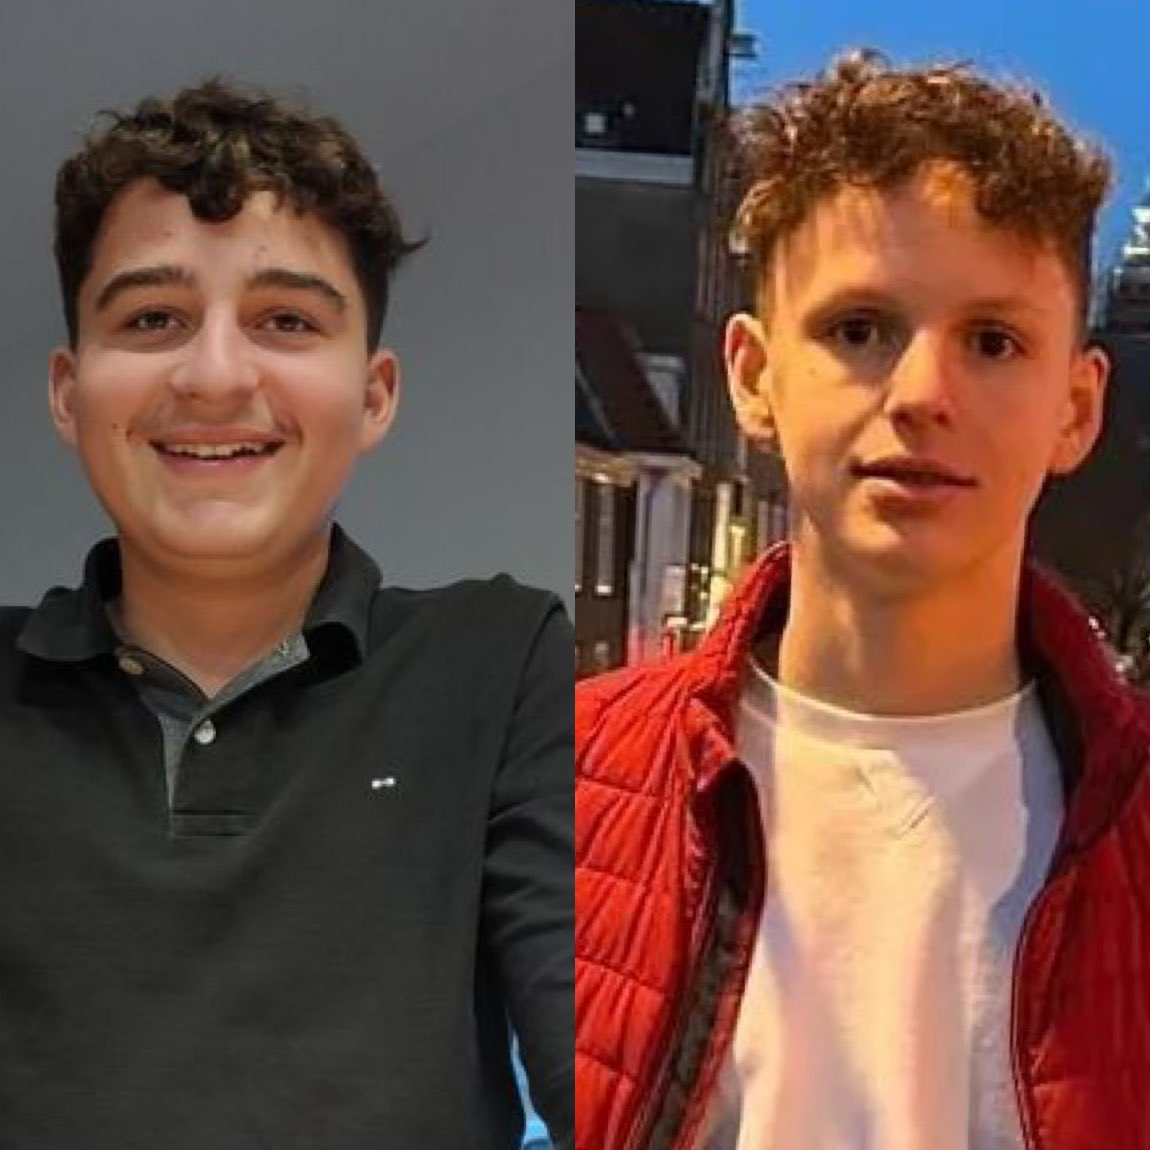 In memory of Thomas and Pilipp, two 16 year old boys kiIIed by Muslim immigrants in France and Germany because they were European and white. May God protect our children.